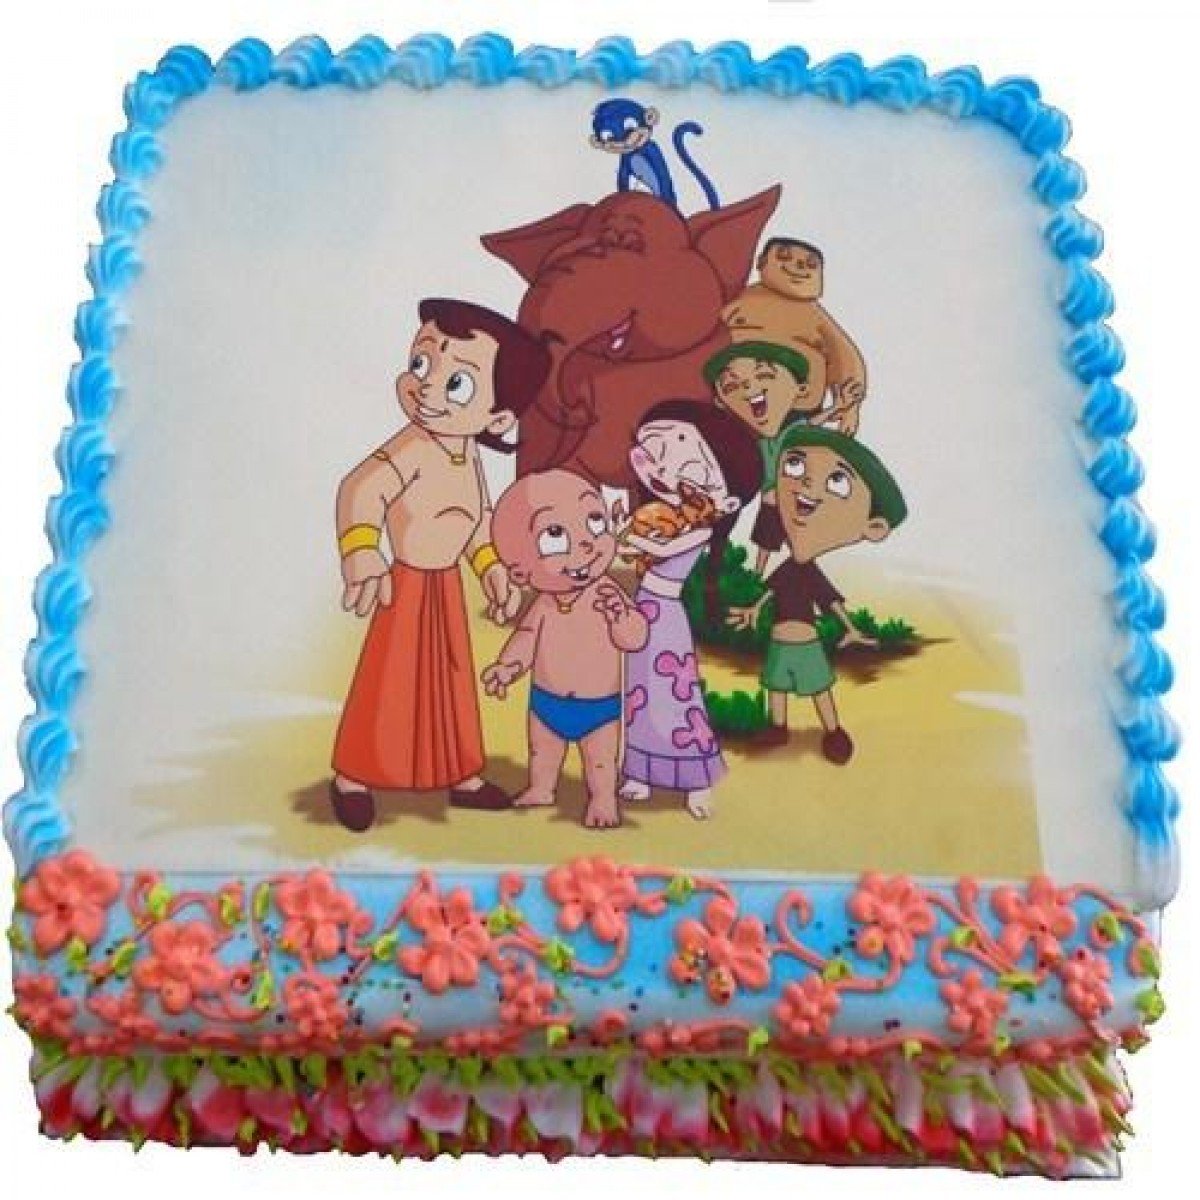 Send Shaped Cakes to India. Buy Shaped Cakes Online. Giftsnflowers.in